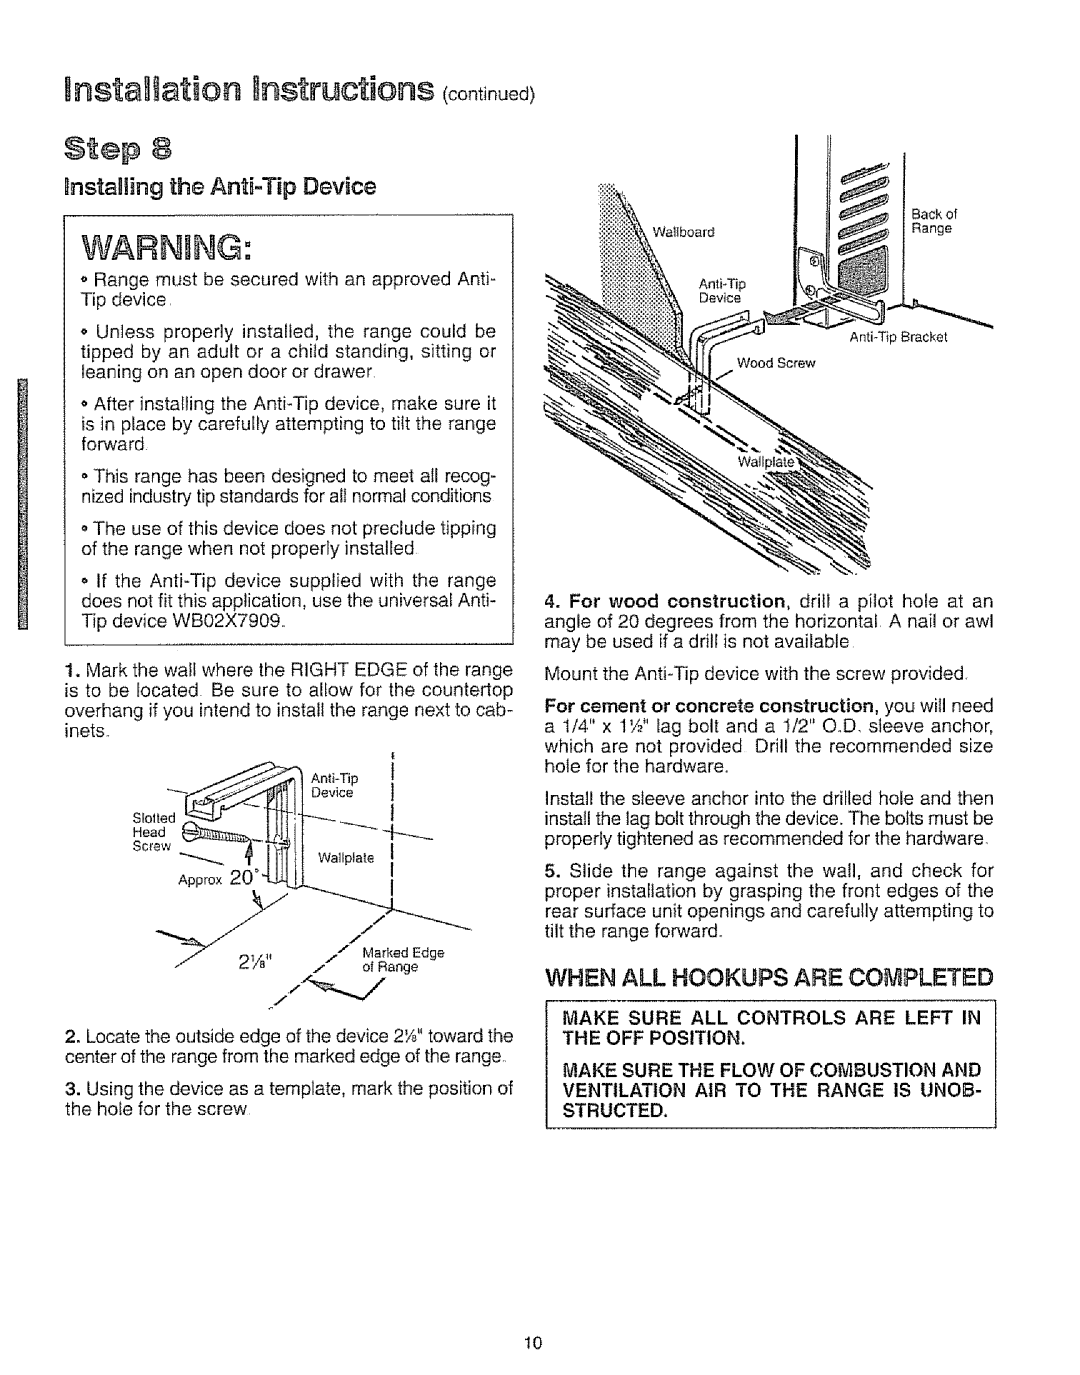 Kenmore 73811 nsta Uation Instructions continue€, IDevice, An,i-Tip1, BnstaHing the Anti-TipDevice, crow l 1-Tl!Wo,,p,a,o 